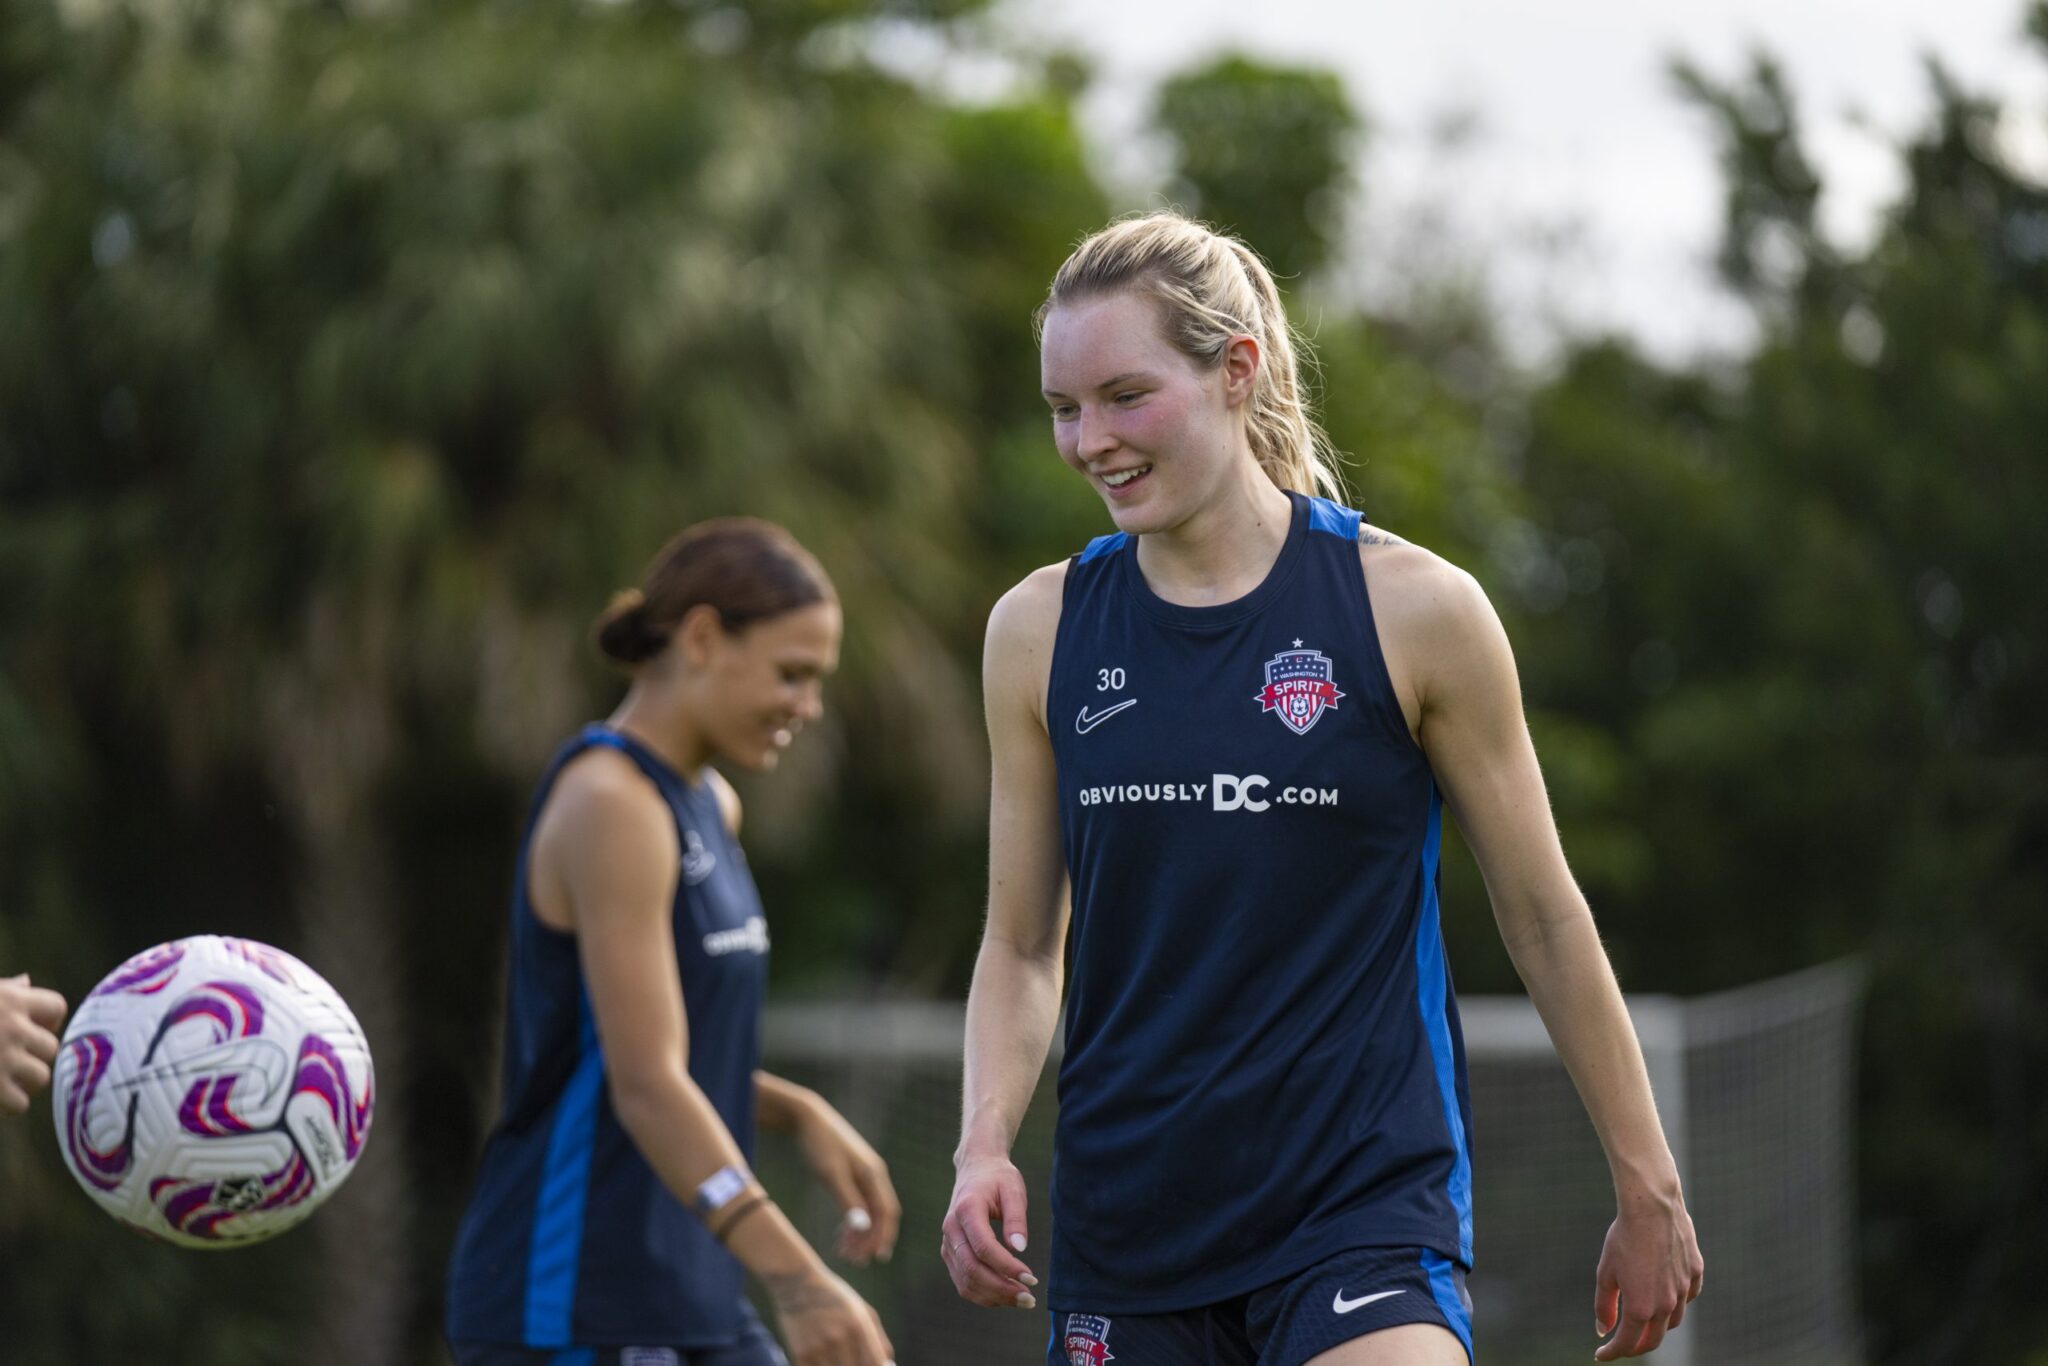 Washington Spirit and District of Columbia announce 2023 season-long partnership with debut of ObviouslyDC.com on training kits Featured Image